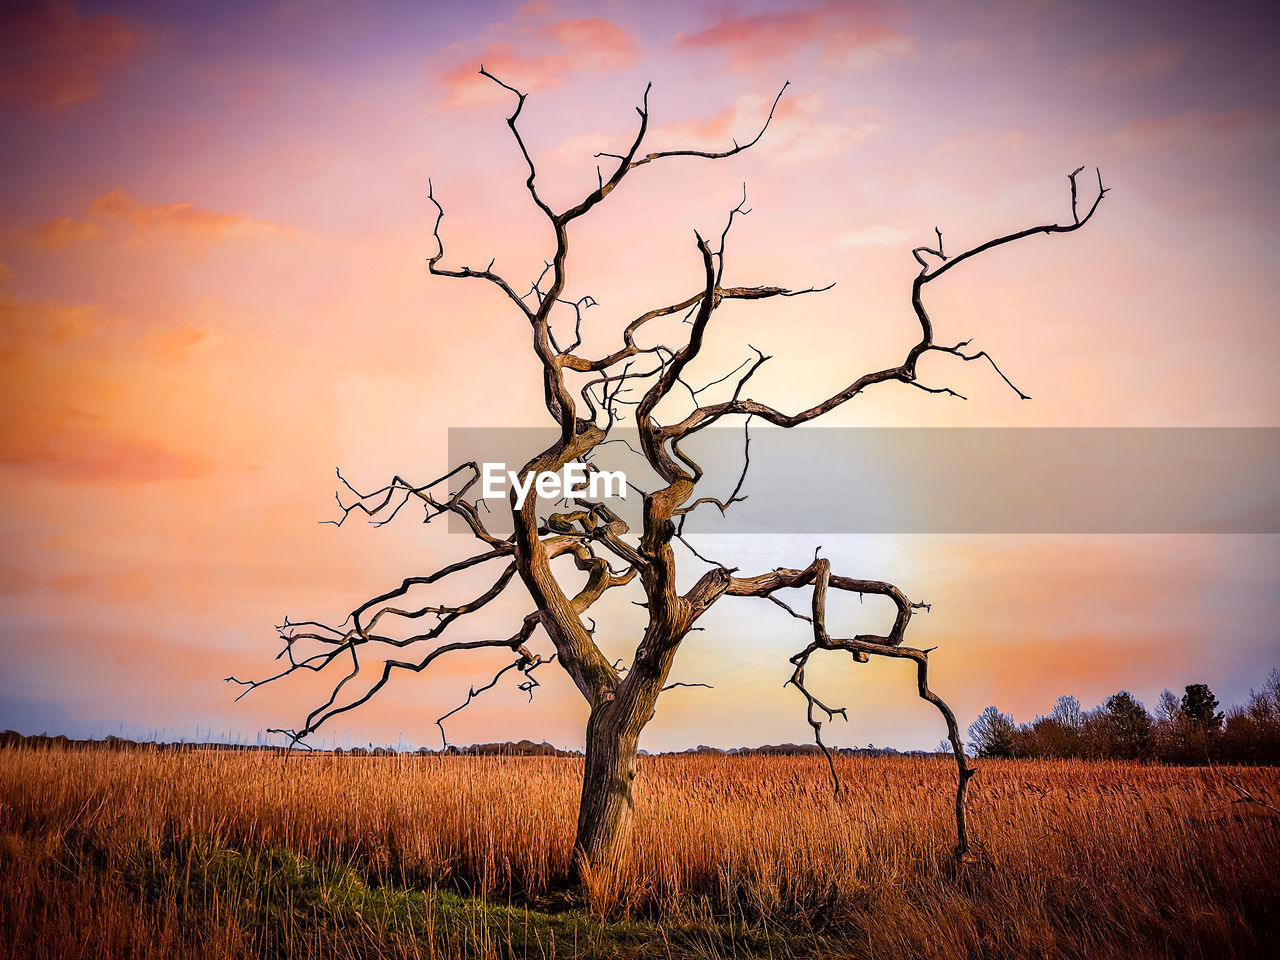 BARE TREE ON FIELD DURING SUNSET